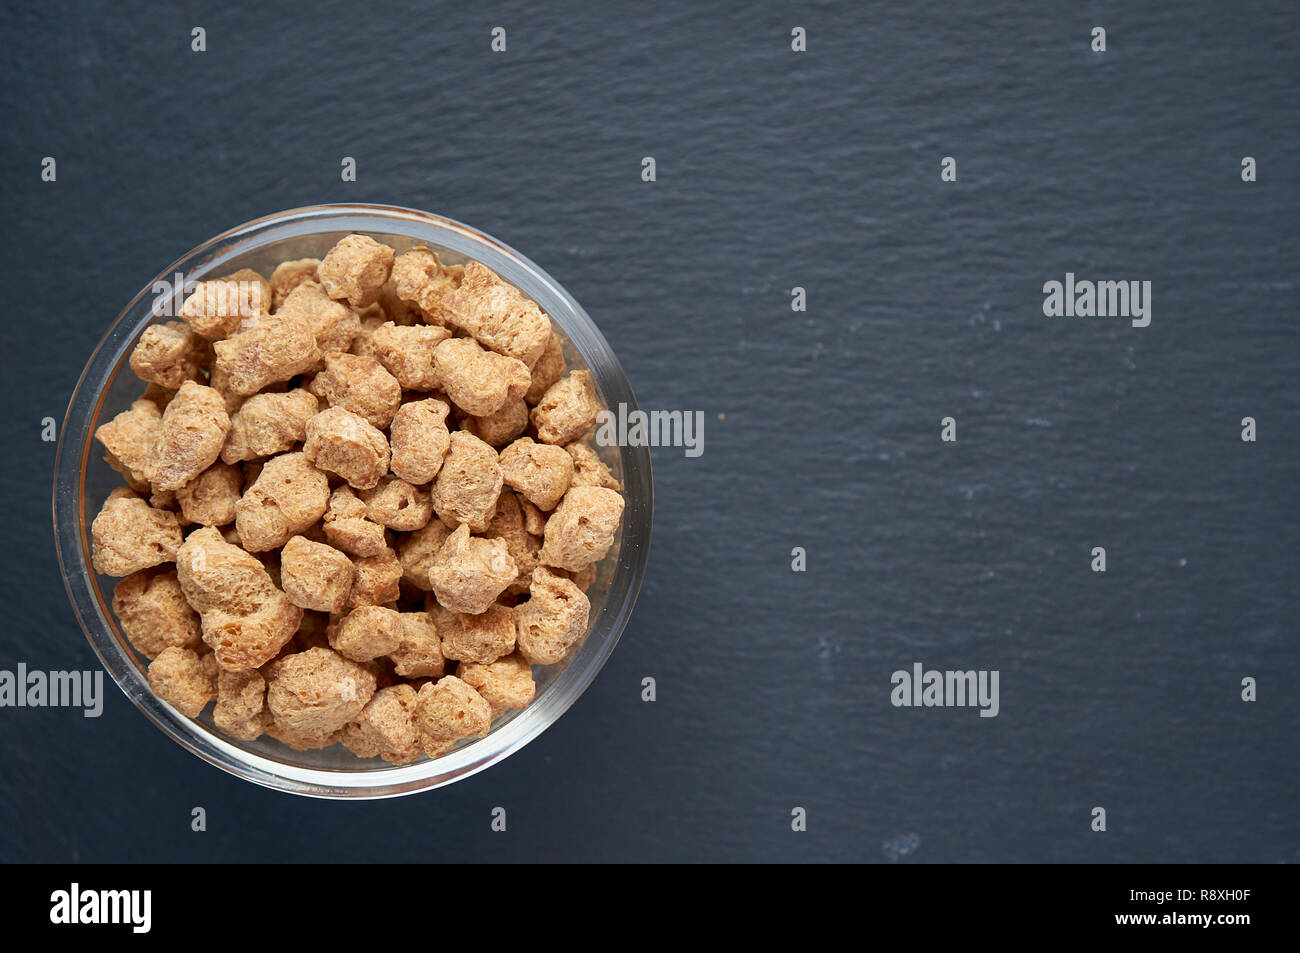 Healthy, nutritious soybean meat, chunks in a white bowl. Top view of raw soya chunks in bowl on dark background. Stock Photo